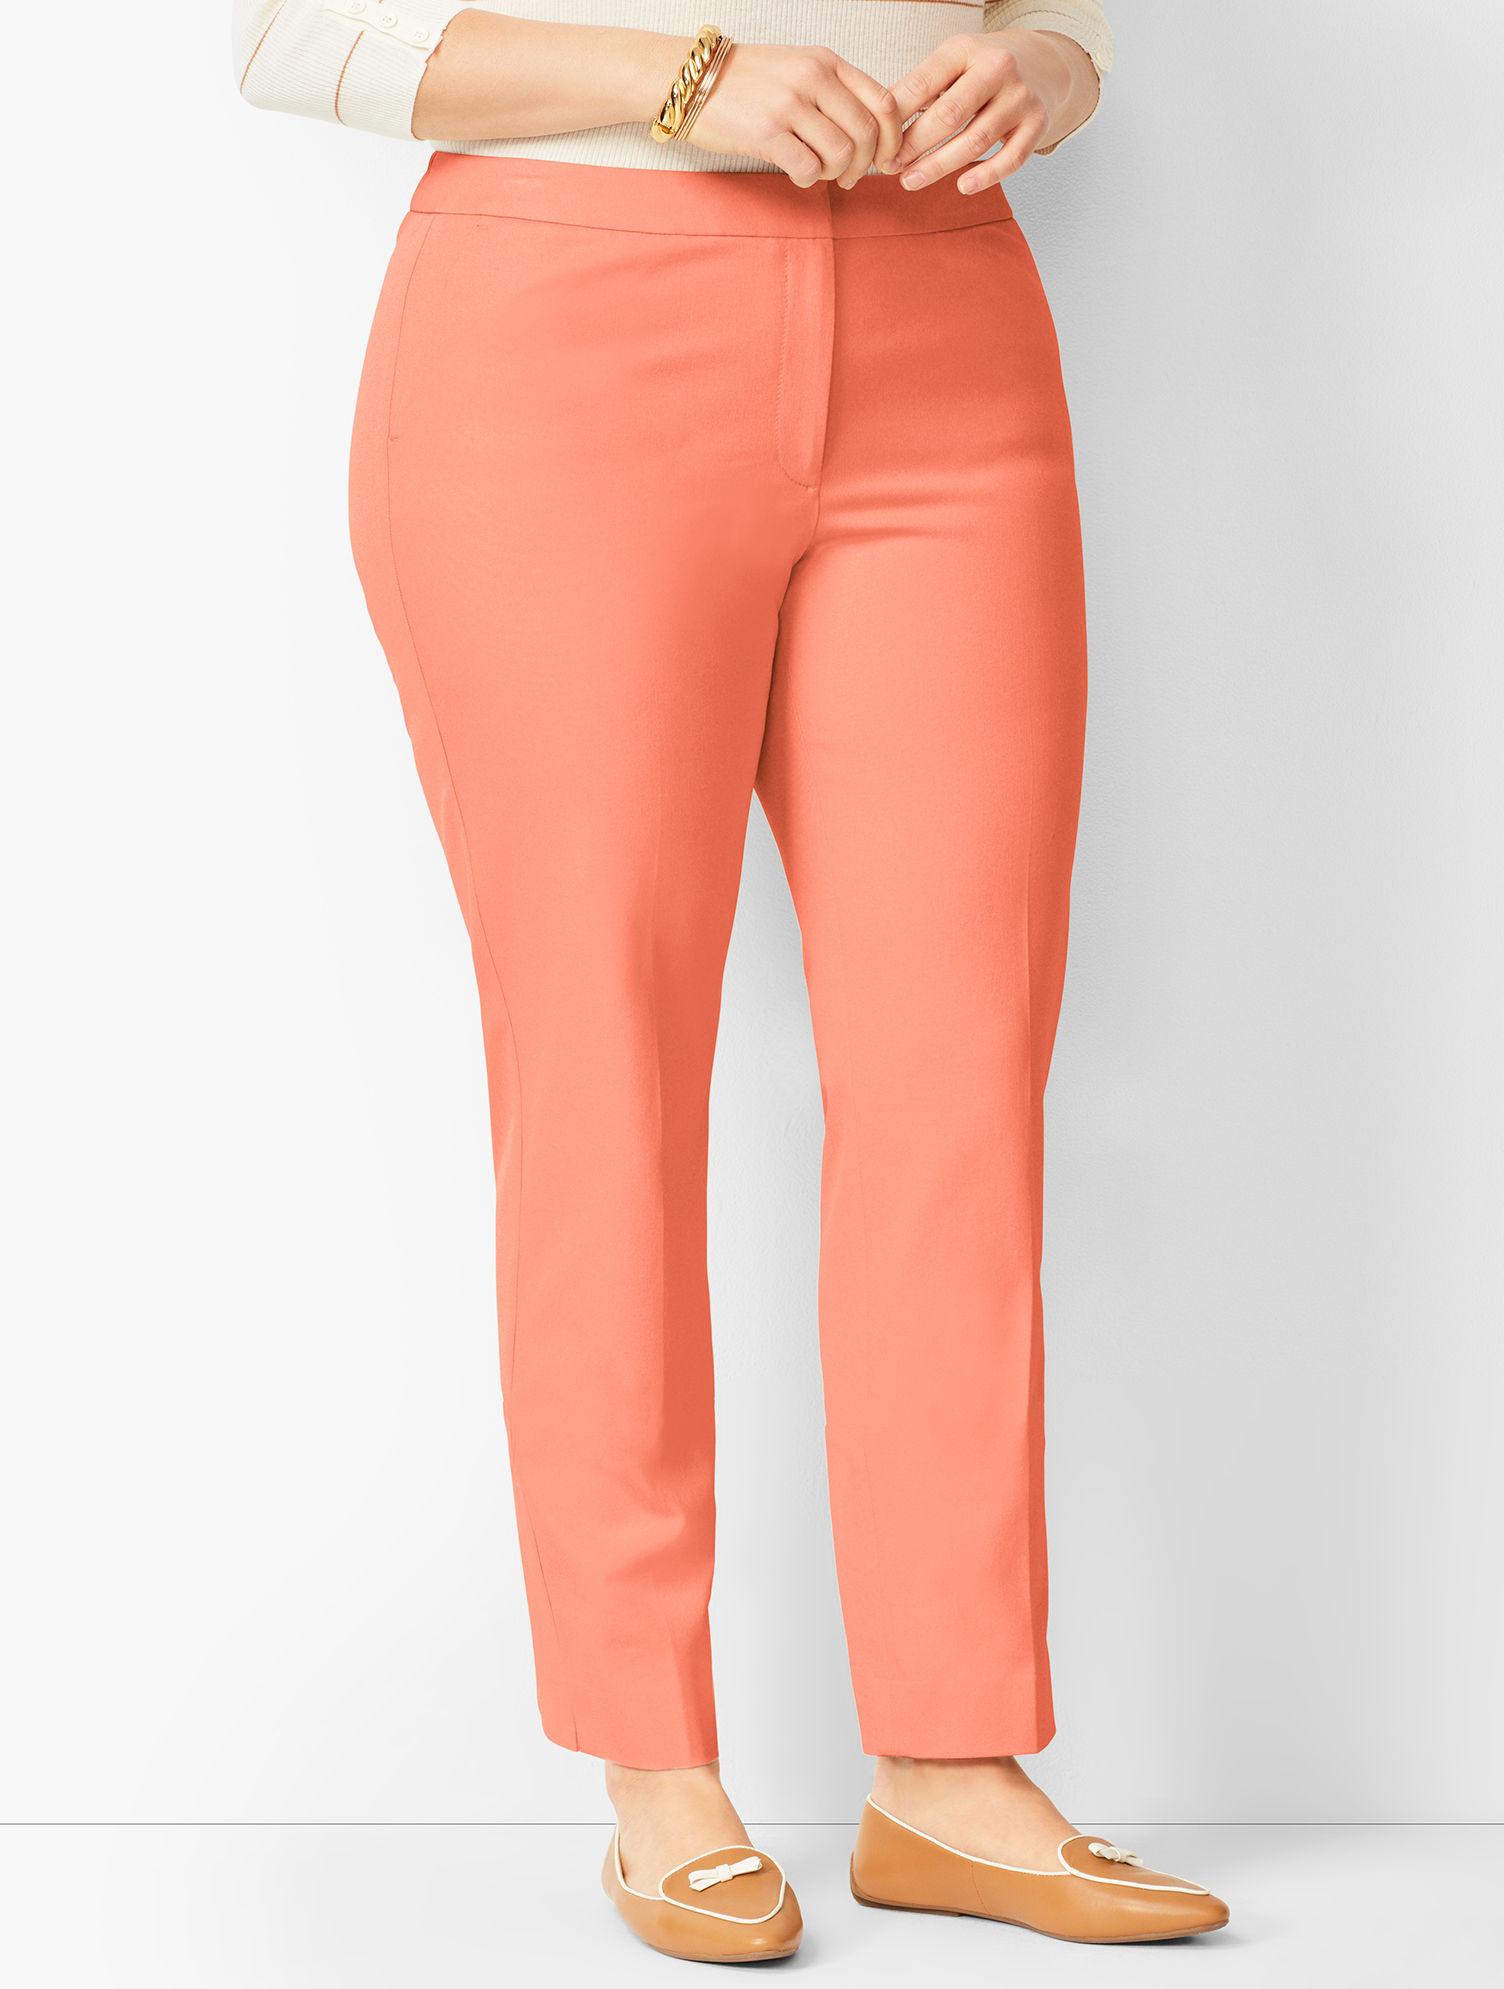 Talbots Hampshire Ankle Pants in Orange - Lyst